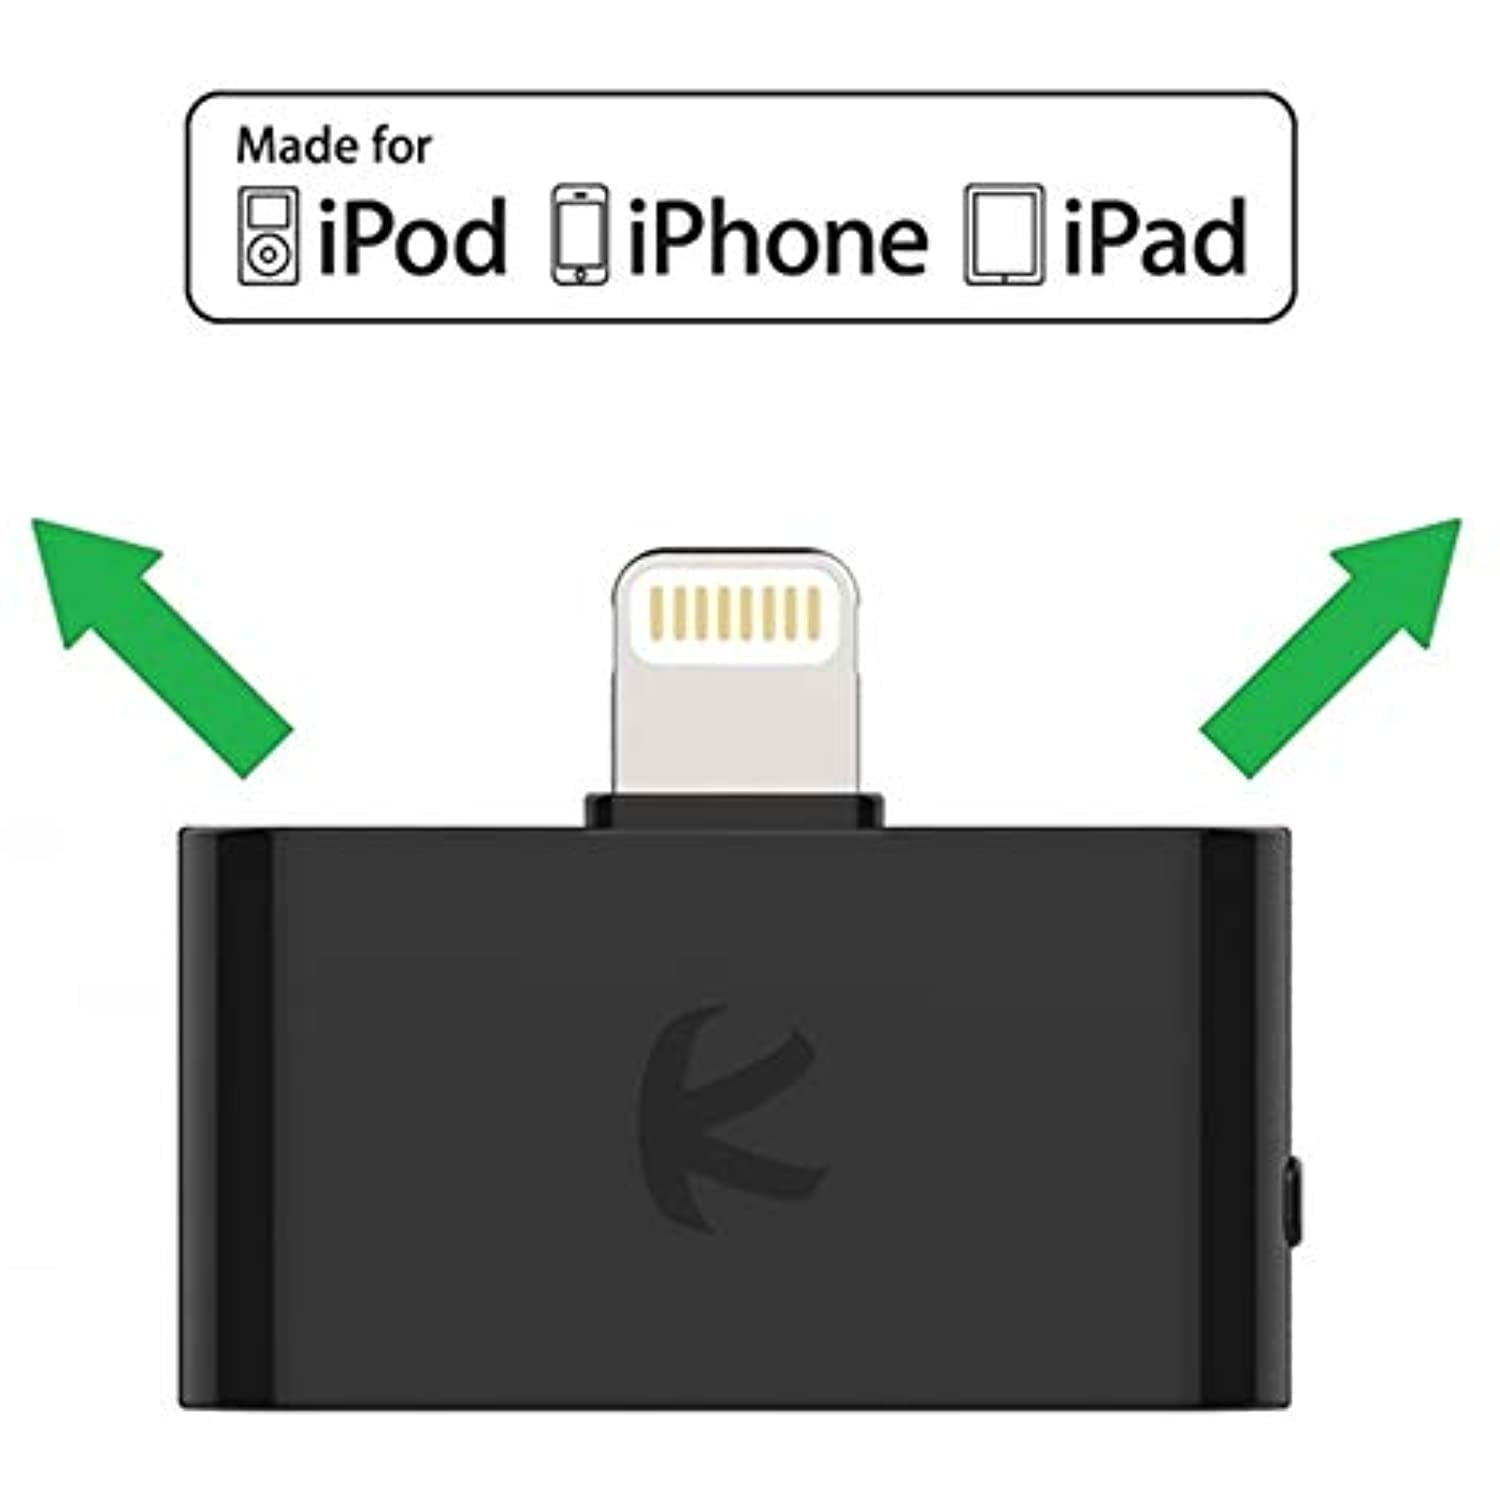 iPod Touch with Lightning Connector PLUS 2 Tiny i10sTwin Bluetooth Stereo Headsets. DIGITAL i10L Bluetooth Splitter Transmitter for iPhone KOKKIA i10L_plus_2i10sTwin iPad 